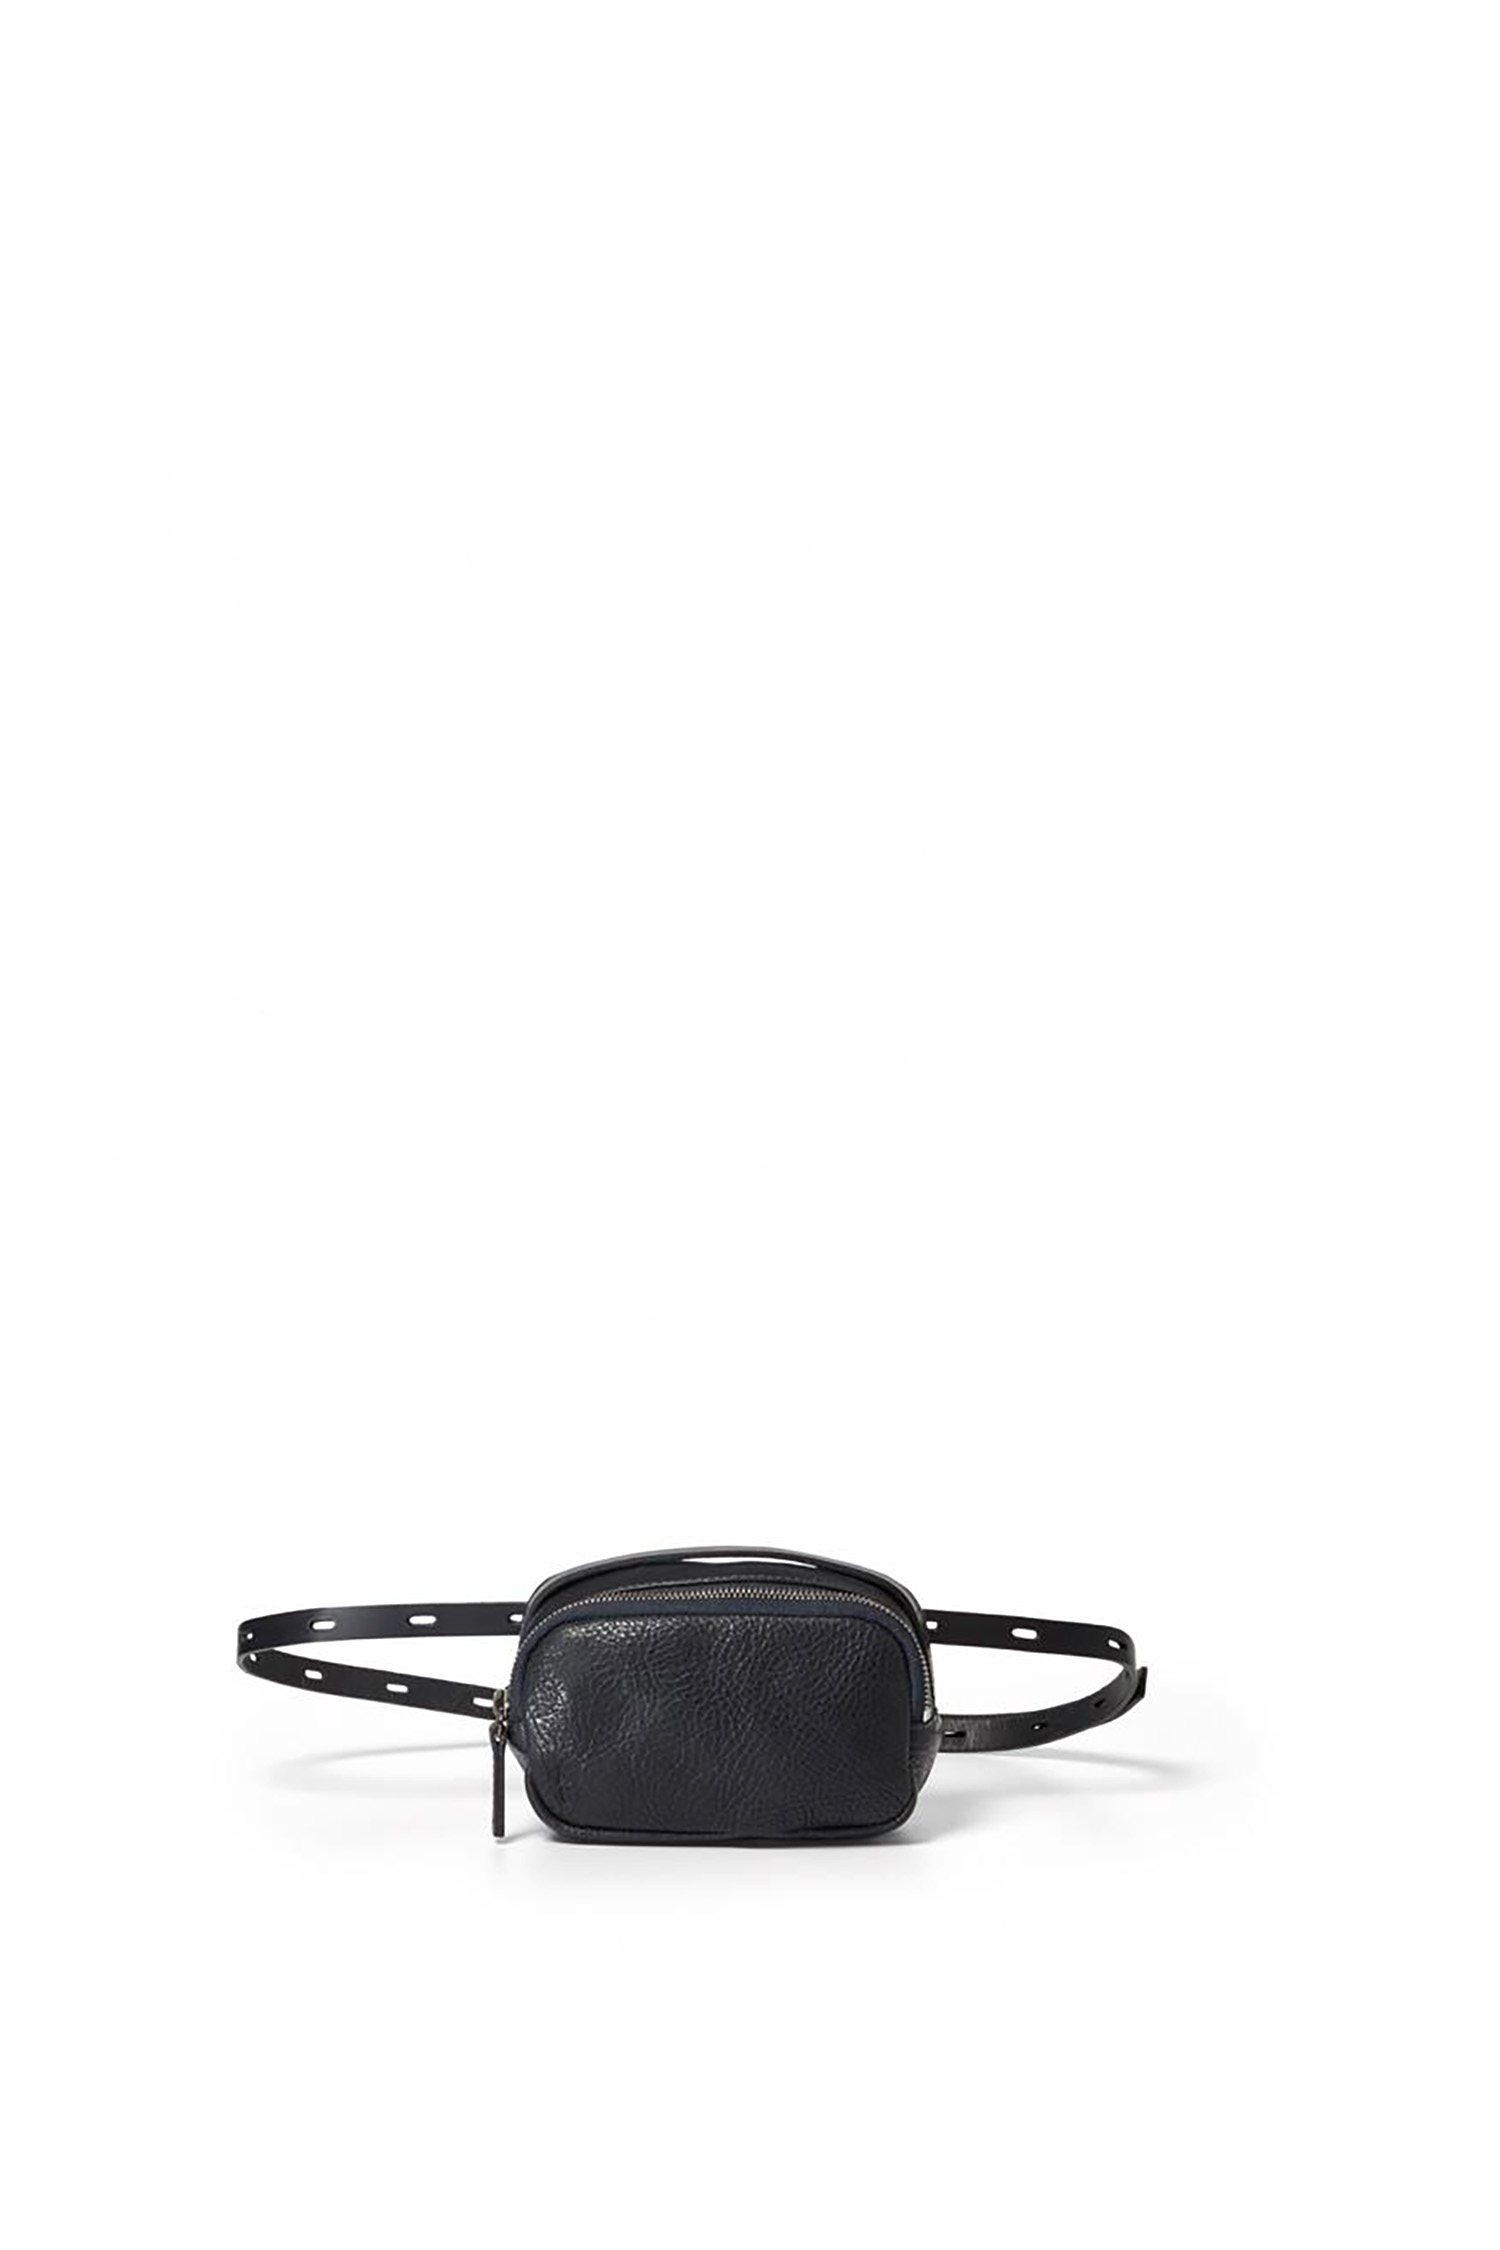 Casia - Selva Fanny Pack, Caramel - OOID Store, CHF 175.00